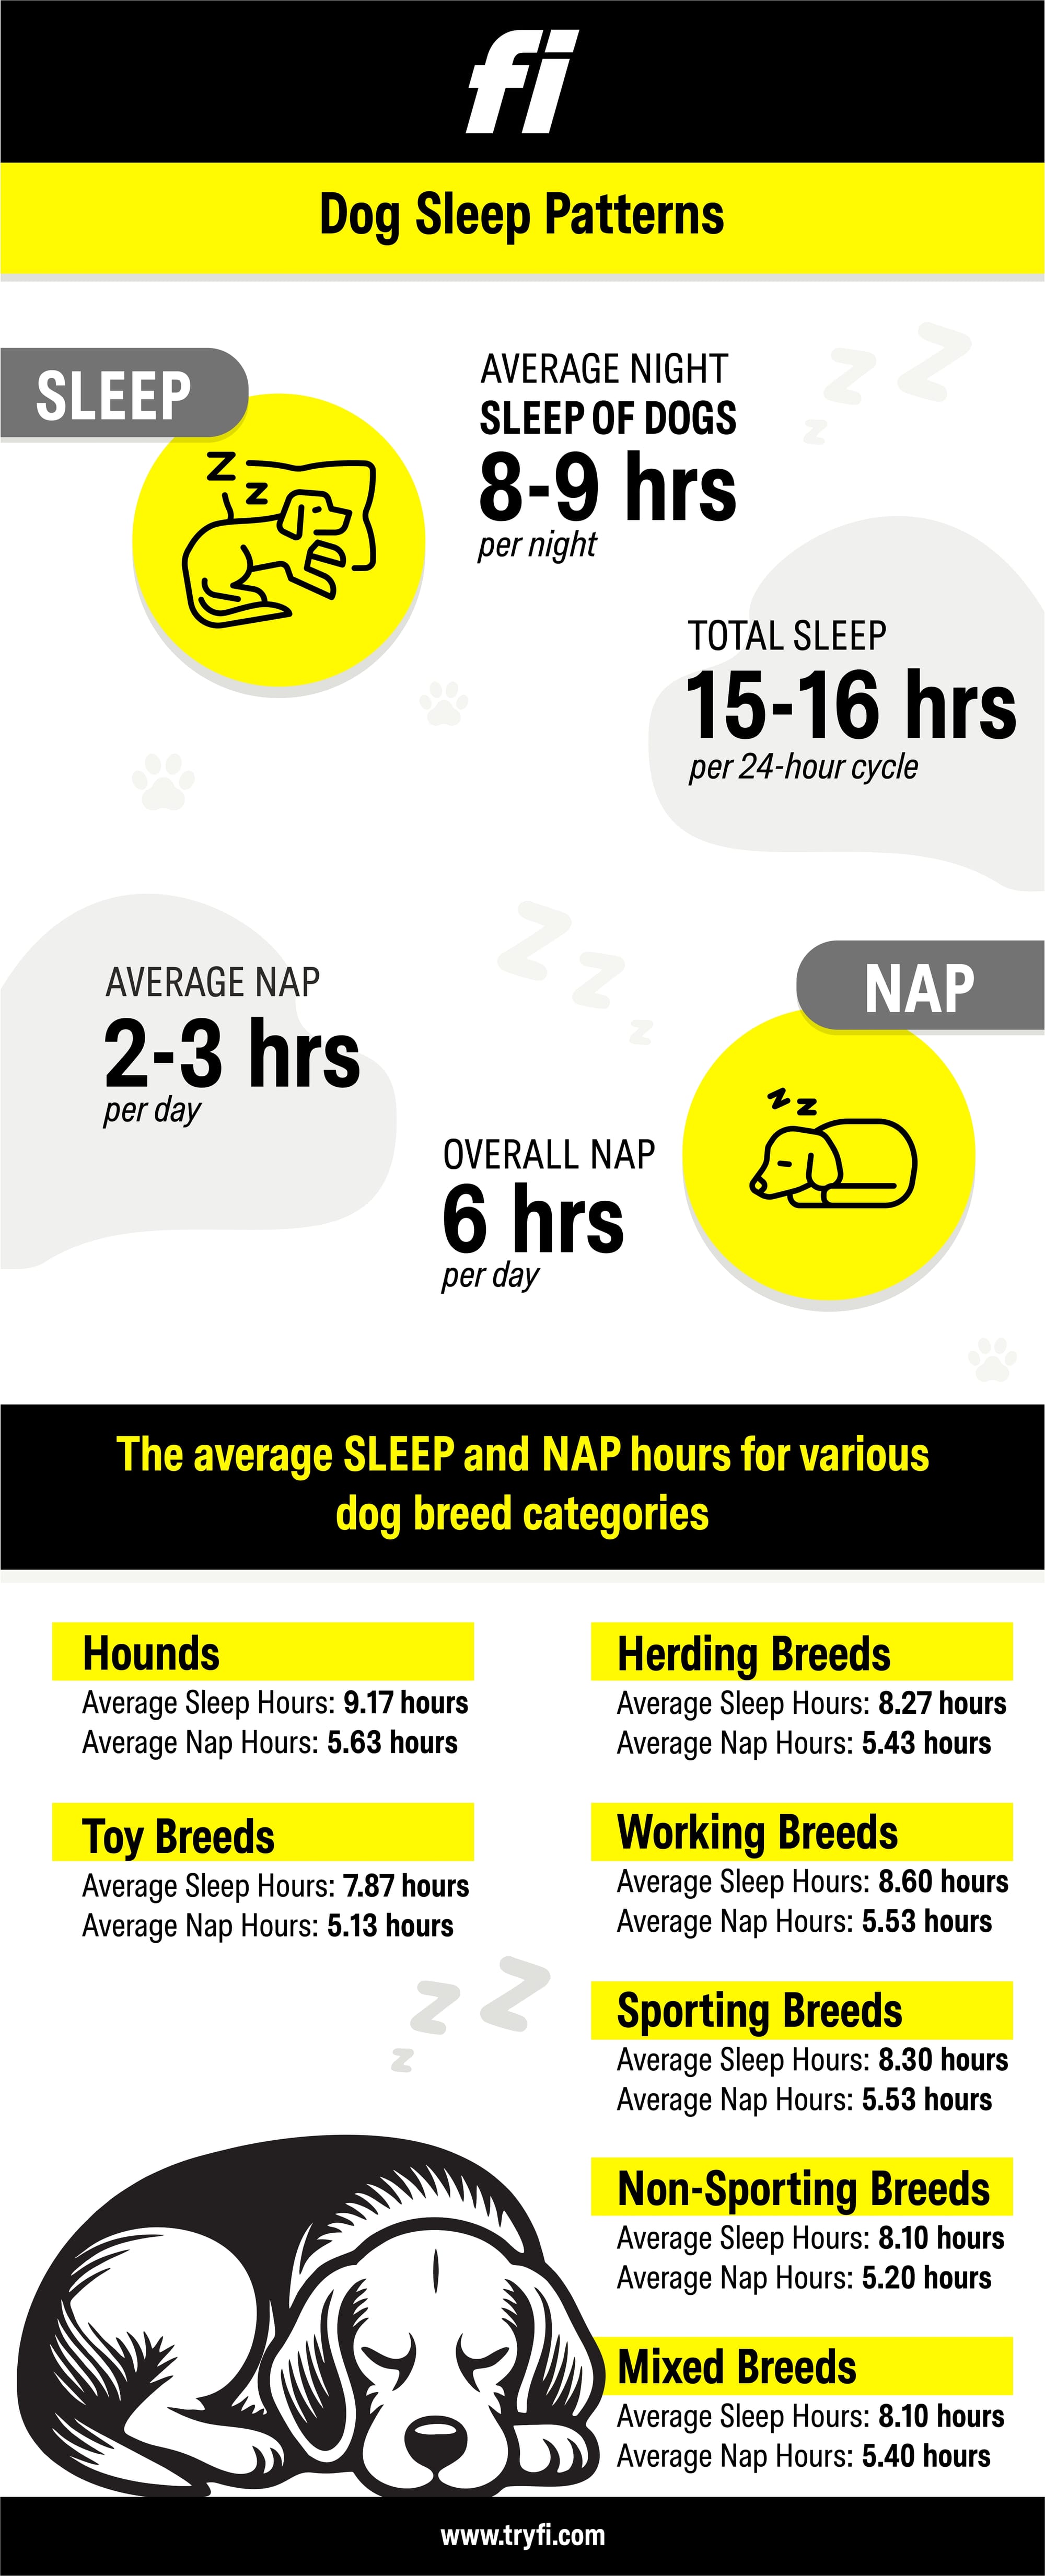 how much sleep does a dog need?